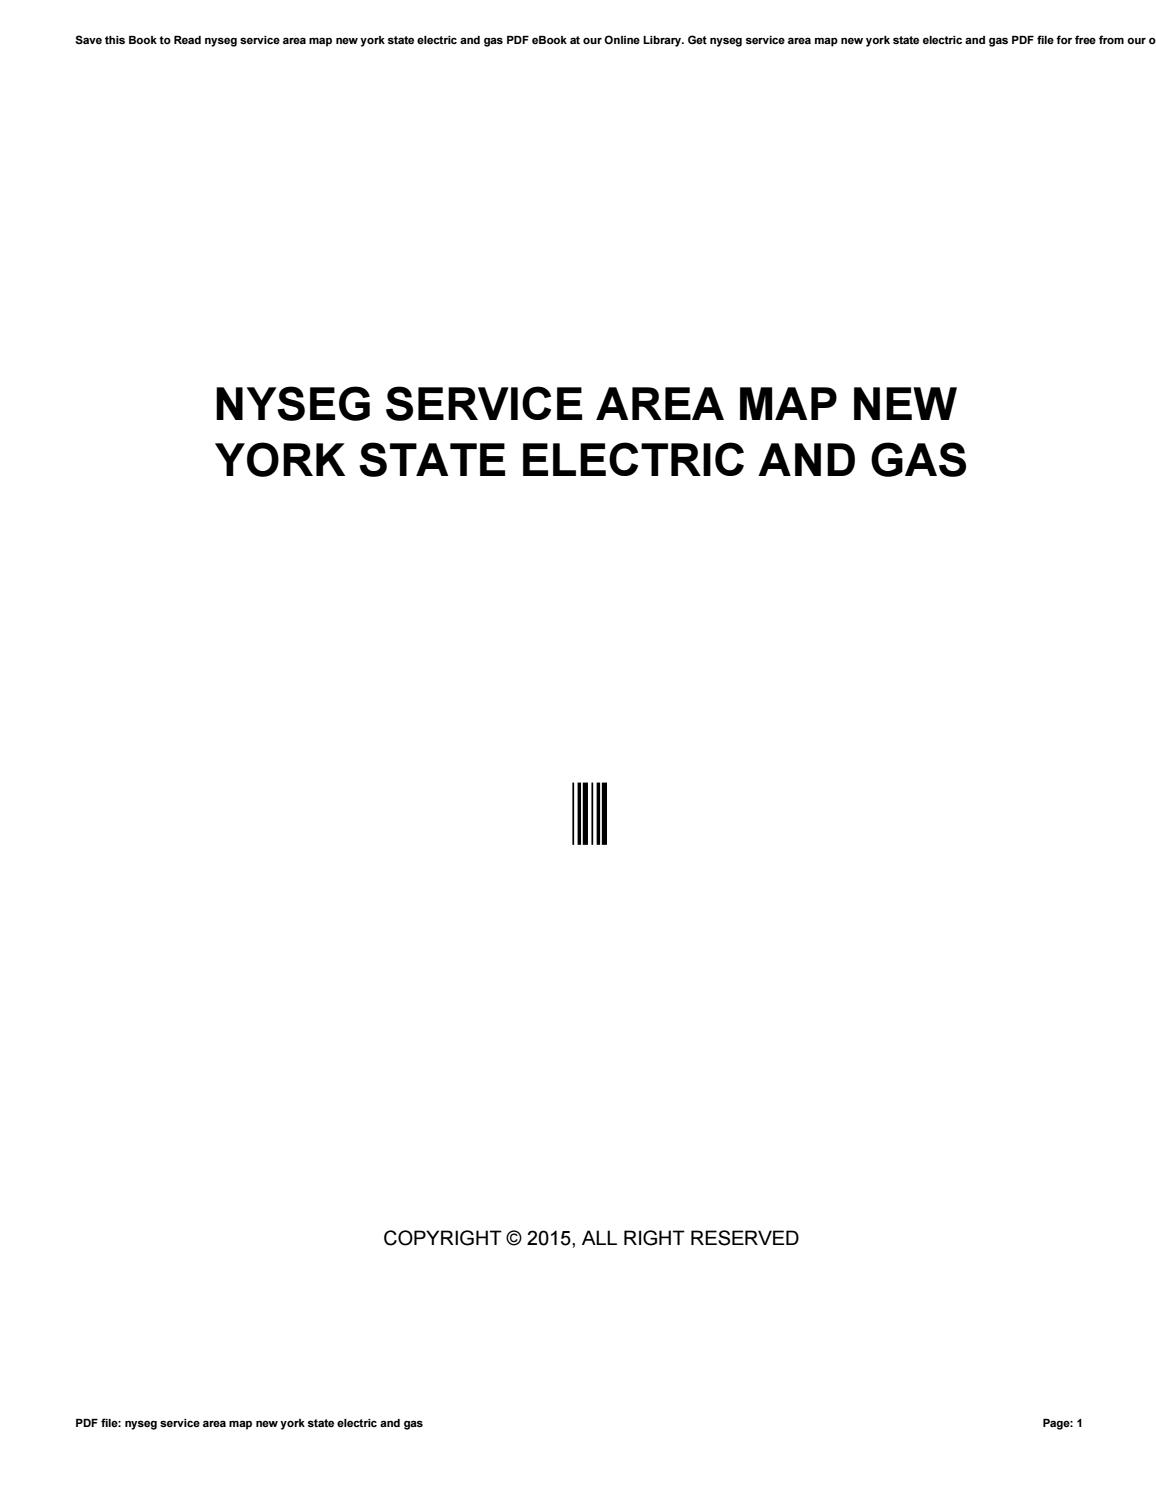 Nyseg Service Area Map New York State Electric And Gas By 